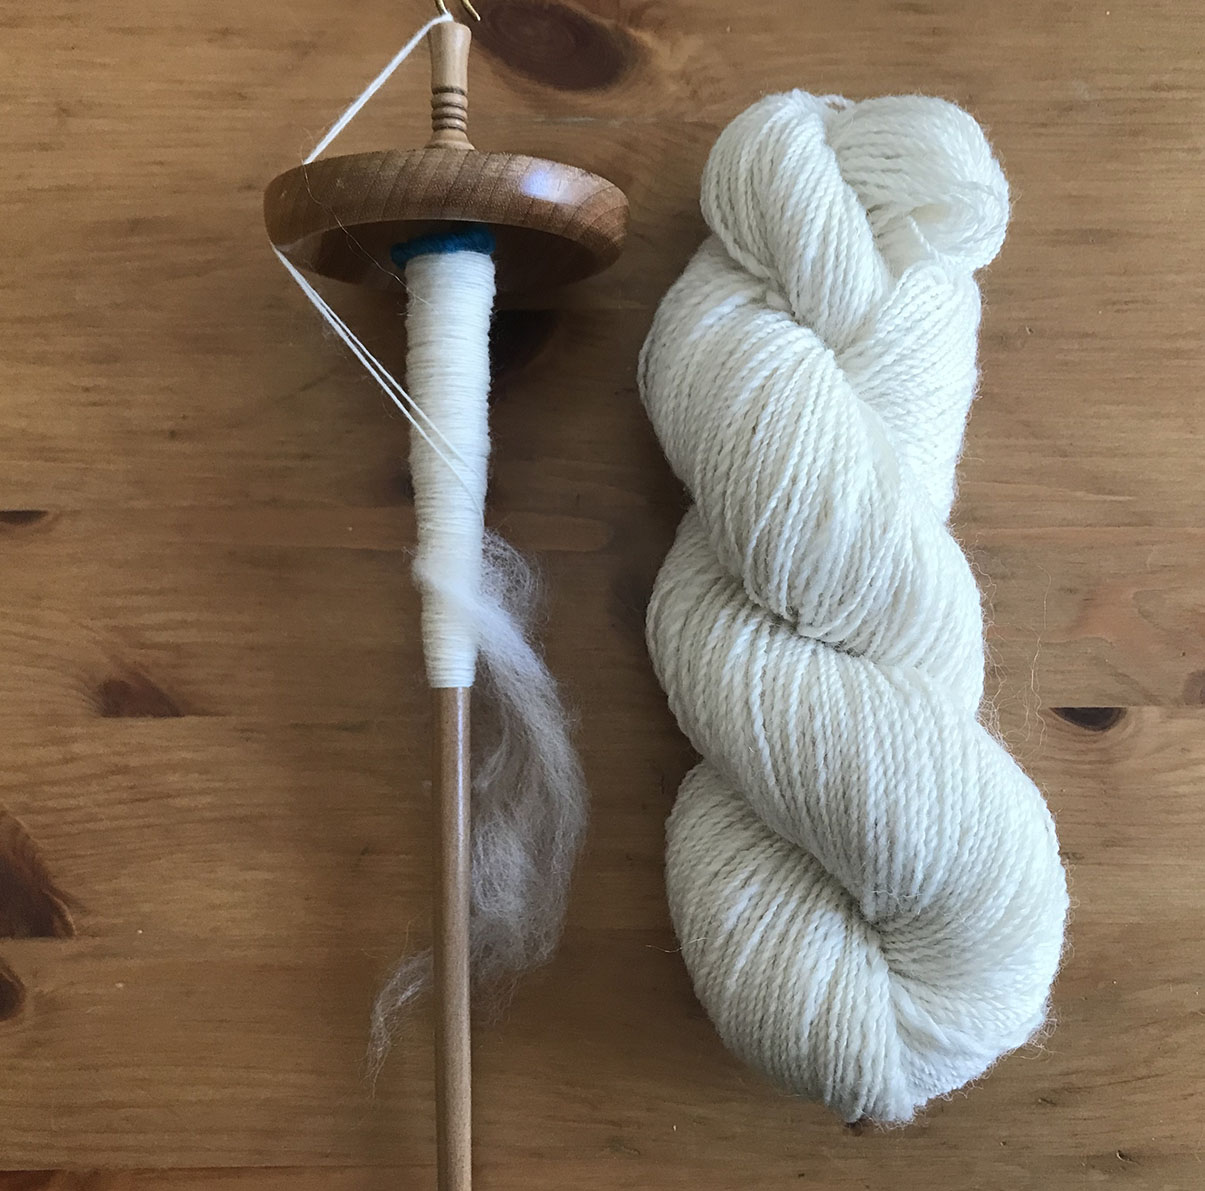 Yarn Spinning Spindle